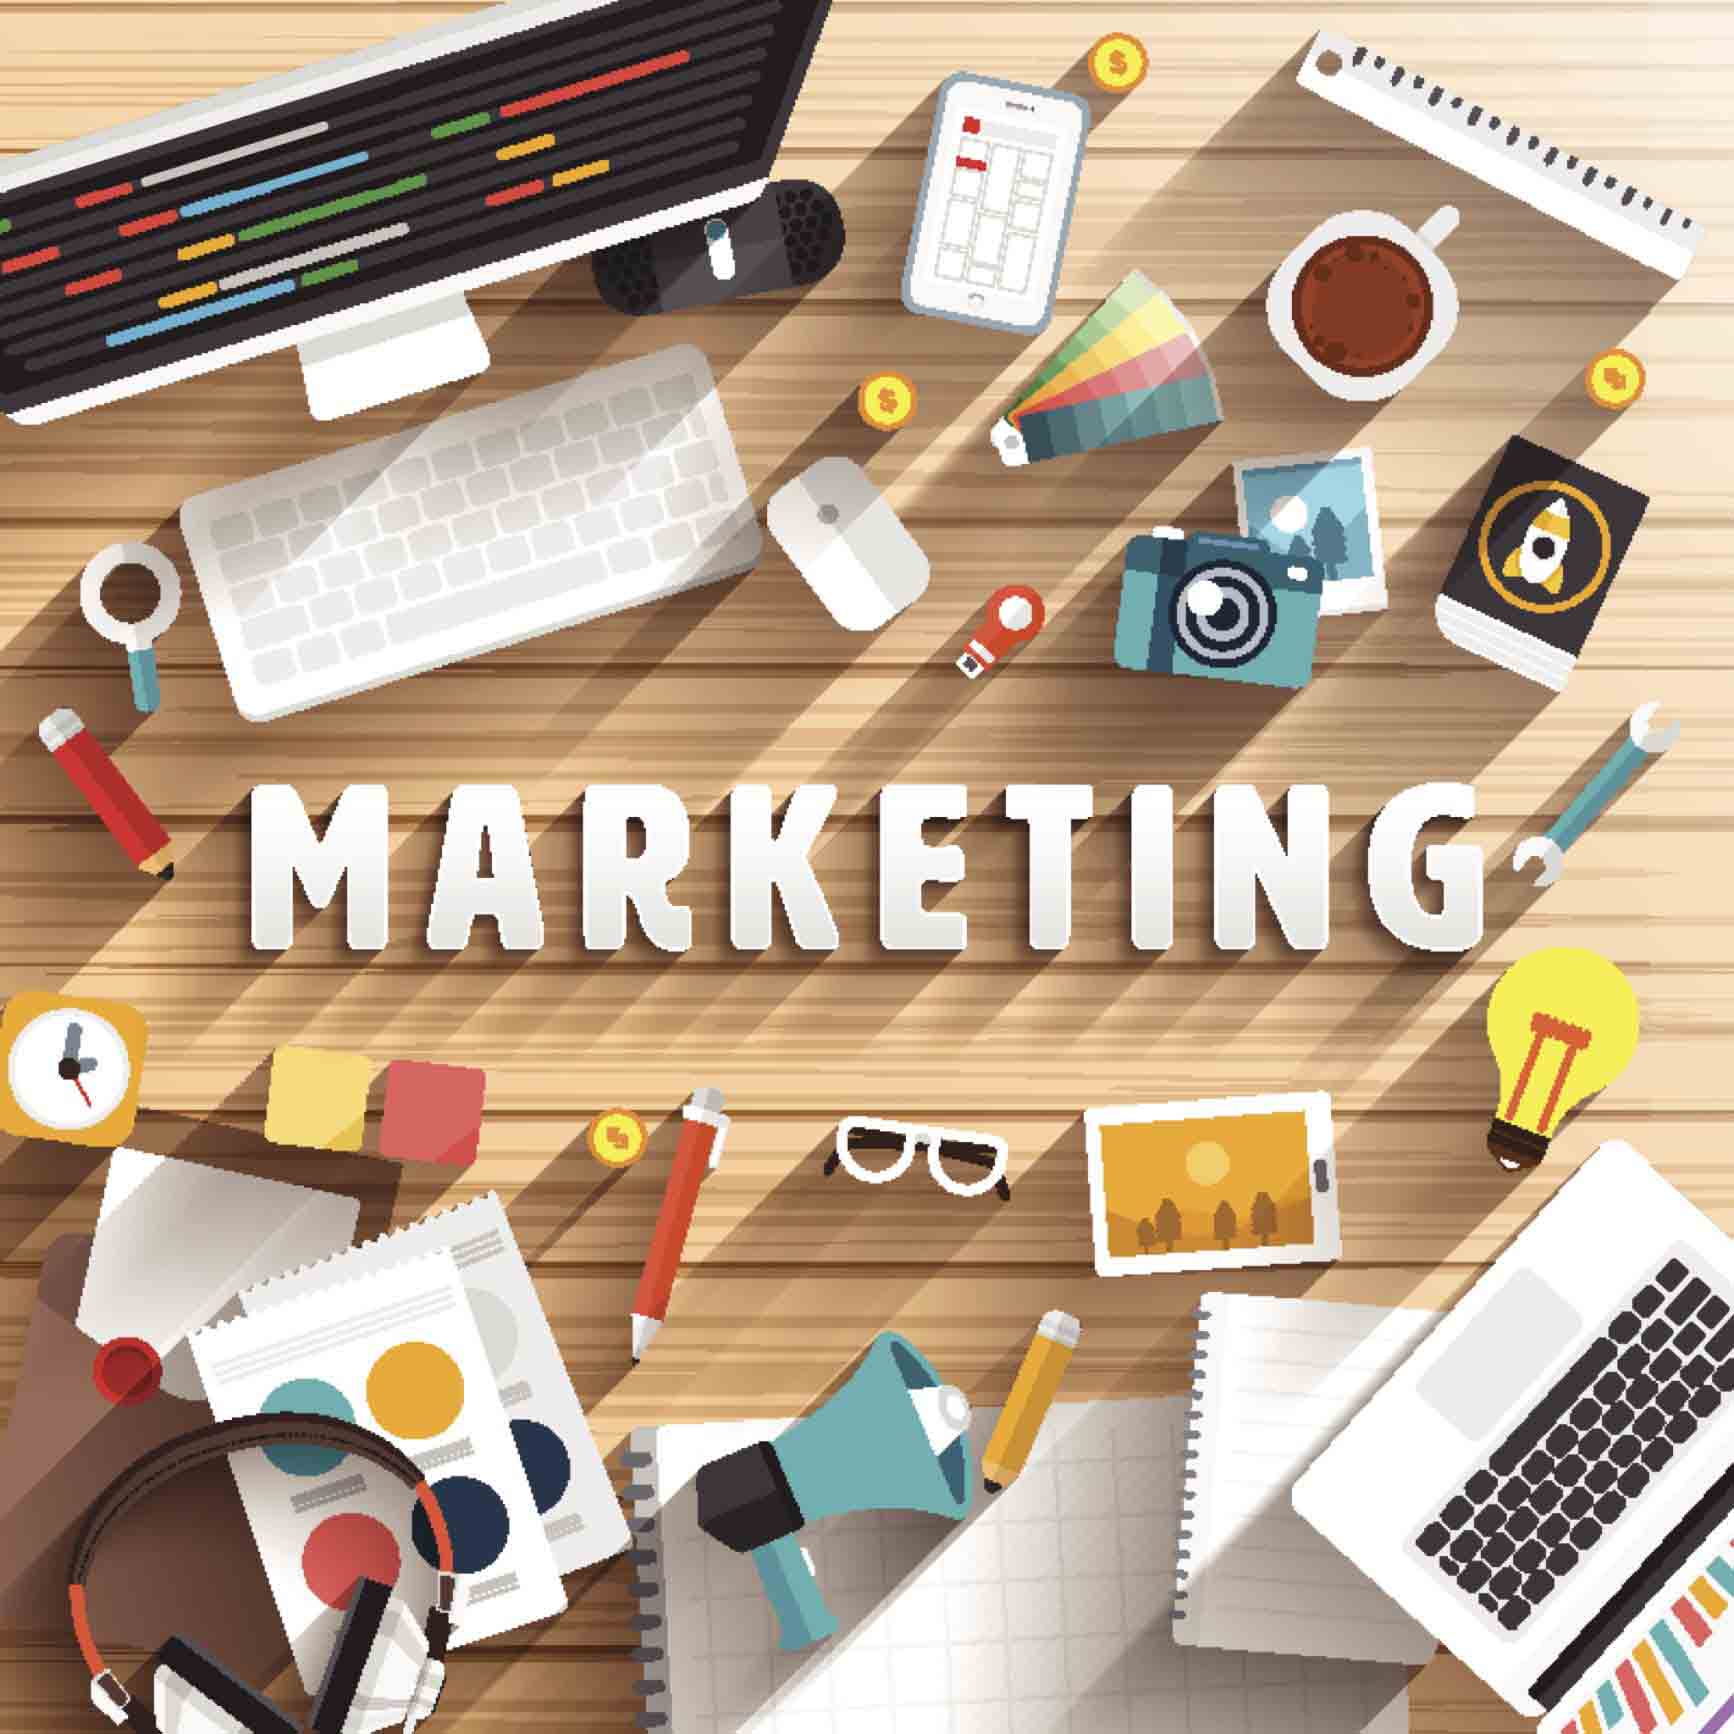 Introduction to Marketing